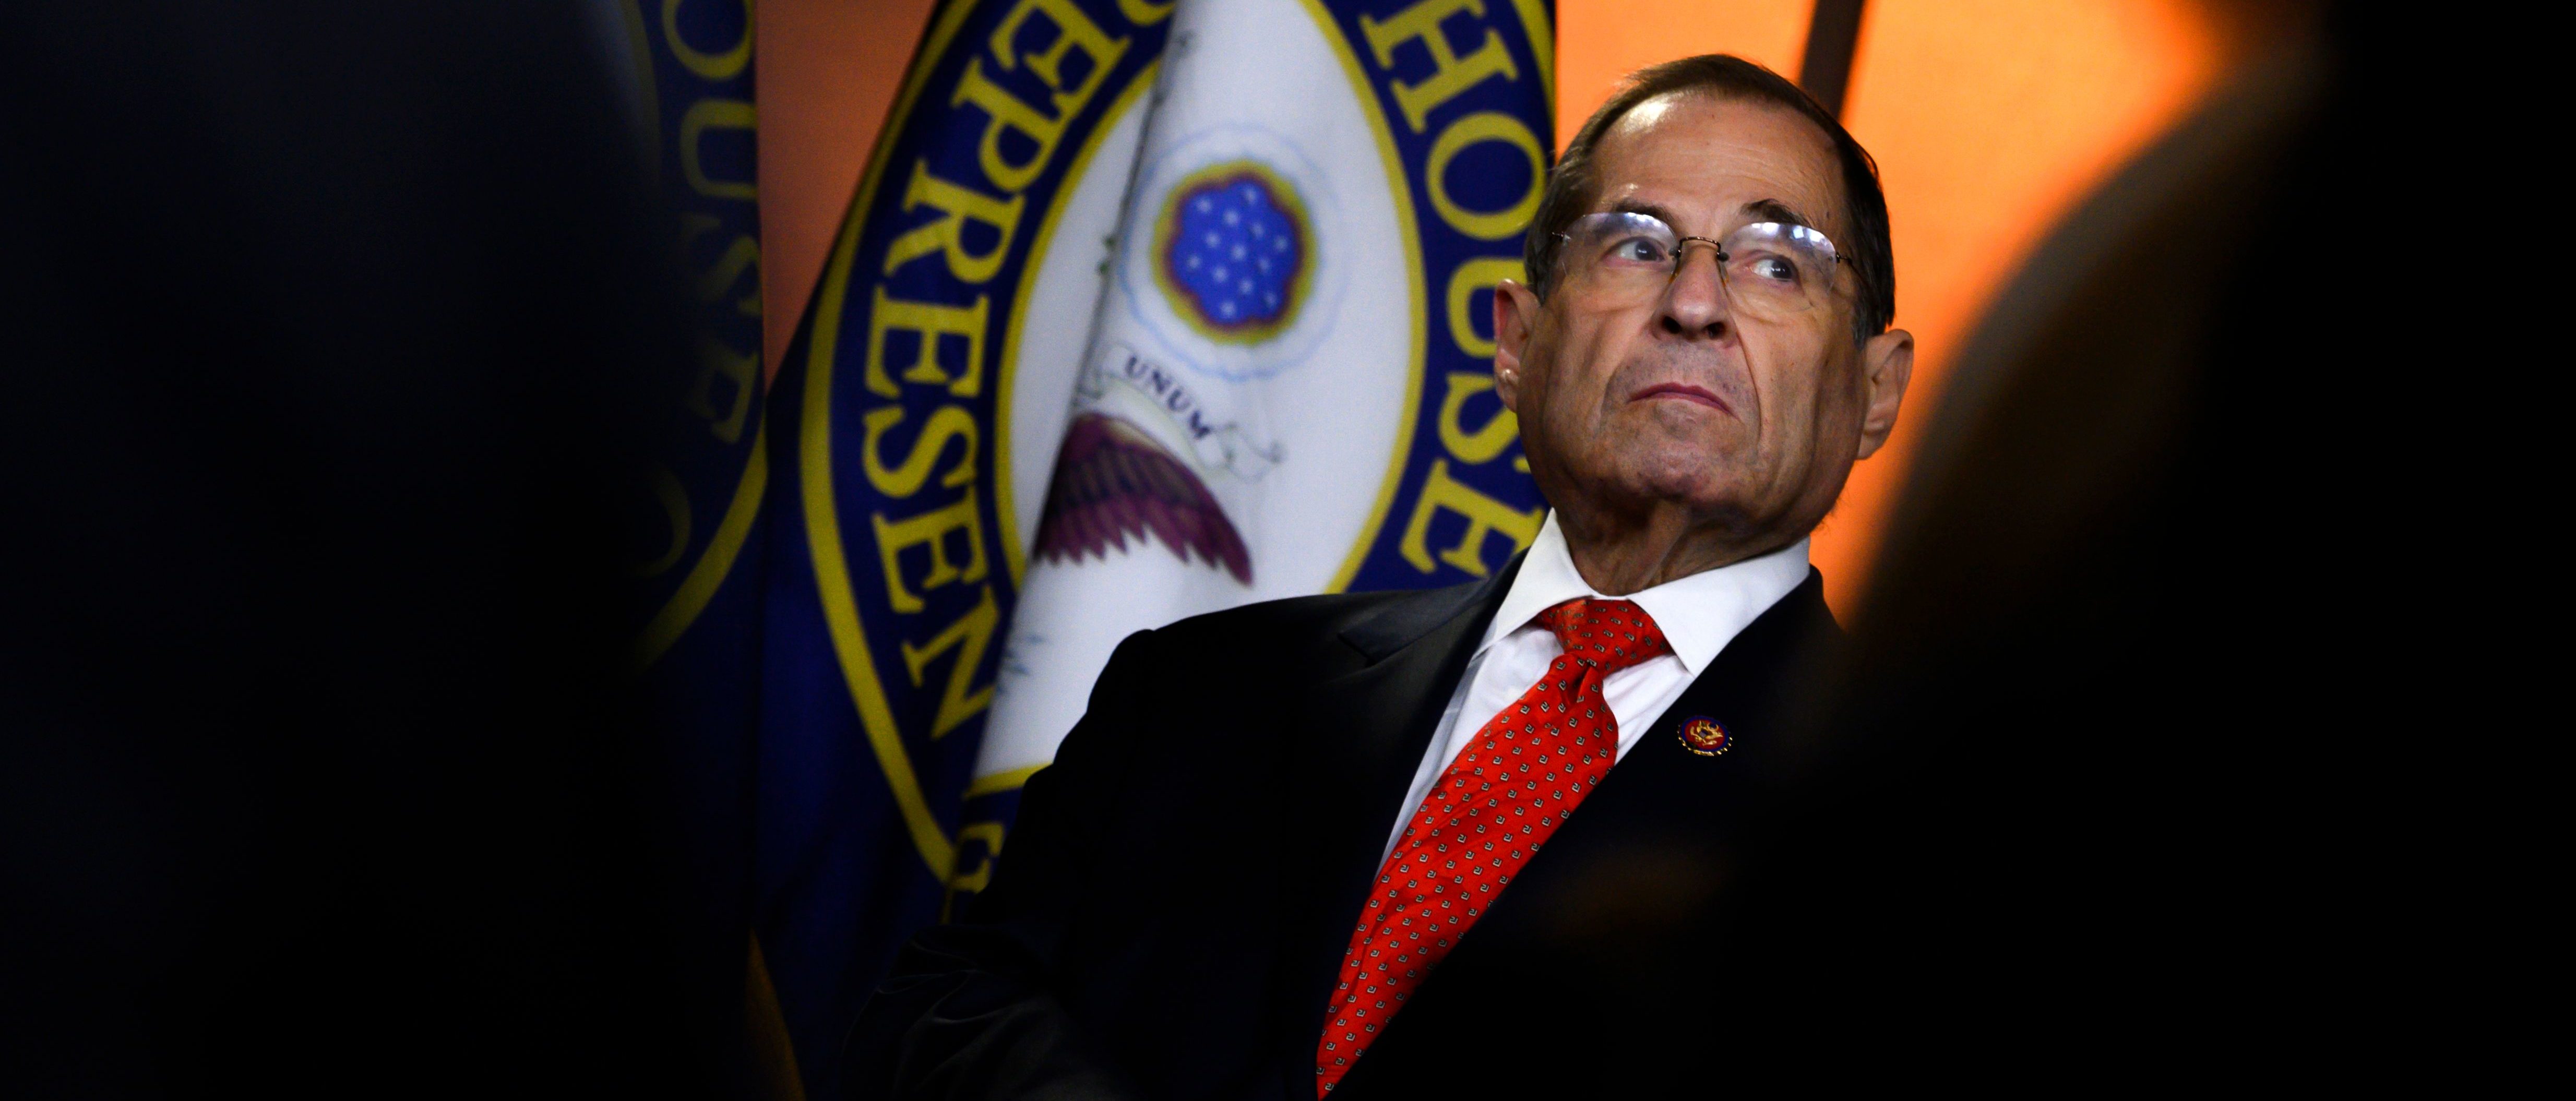 House Judiciary Committee US Representative Jerry Nadler looks on during a press conference following the former Special Counsel's testimony before the House Select Committee on Intelligence in Washington, DC, on July 24, 2019. (Photo by ANDREW CABALLERO-REYNOLDS / AFP) (Photo credit should read ANDREW CABALLERO-REYNOLDS/AFP/Getty Images)